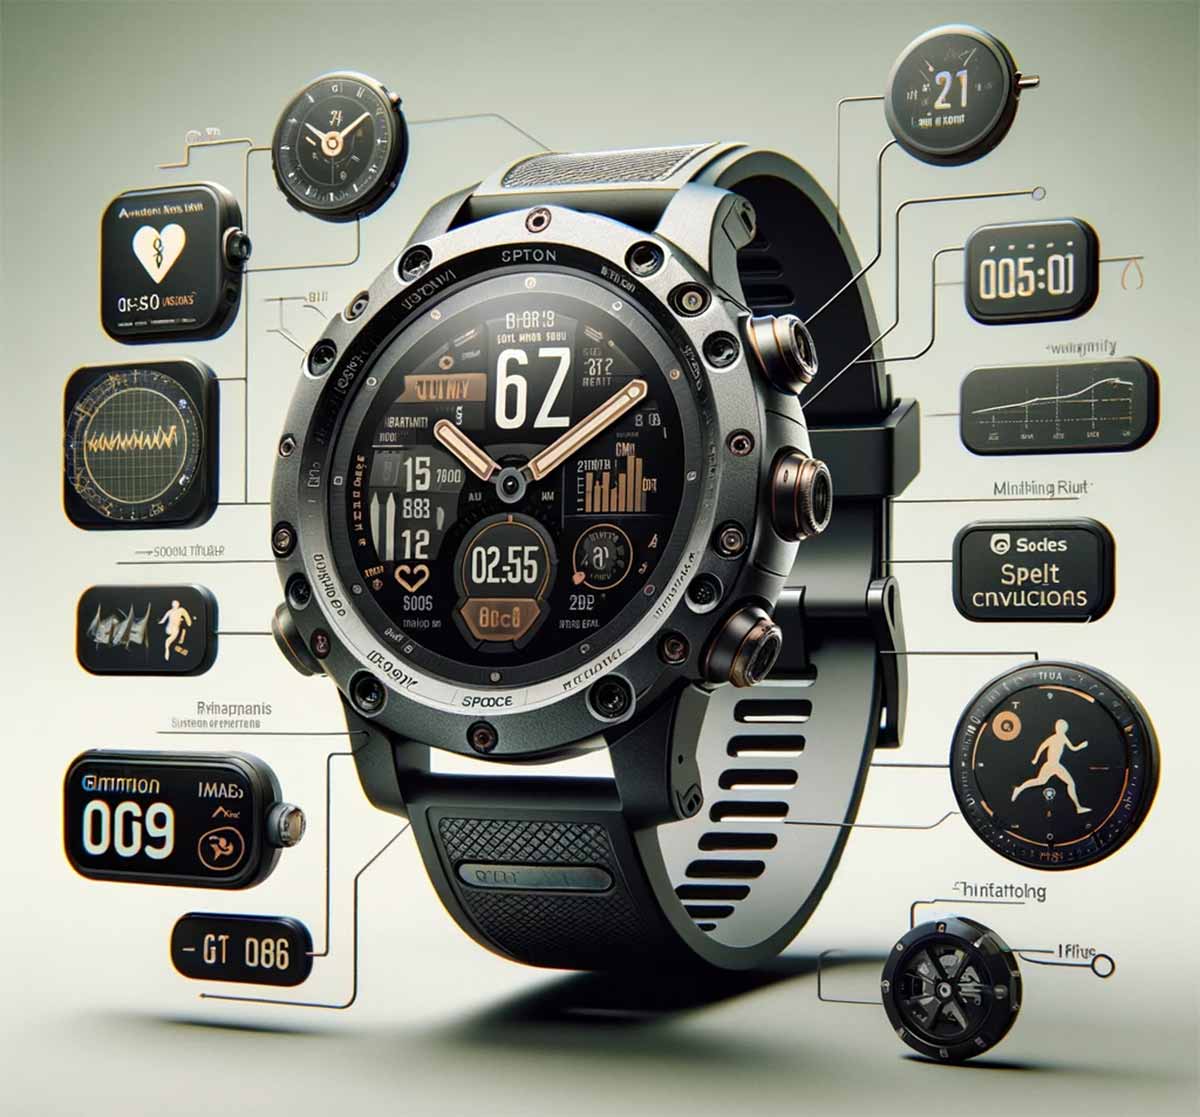 What are the expectations and new features of the Garmin Fenix 8?